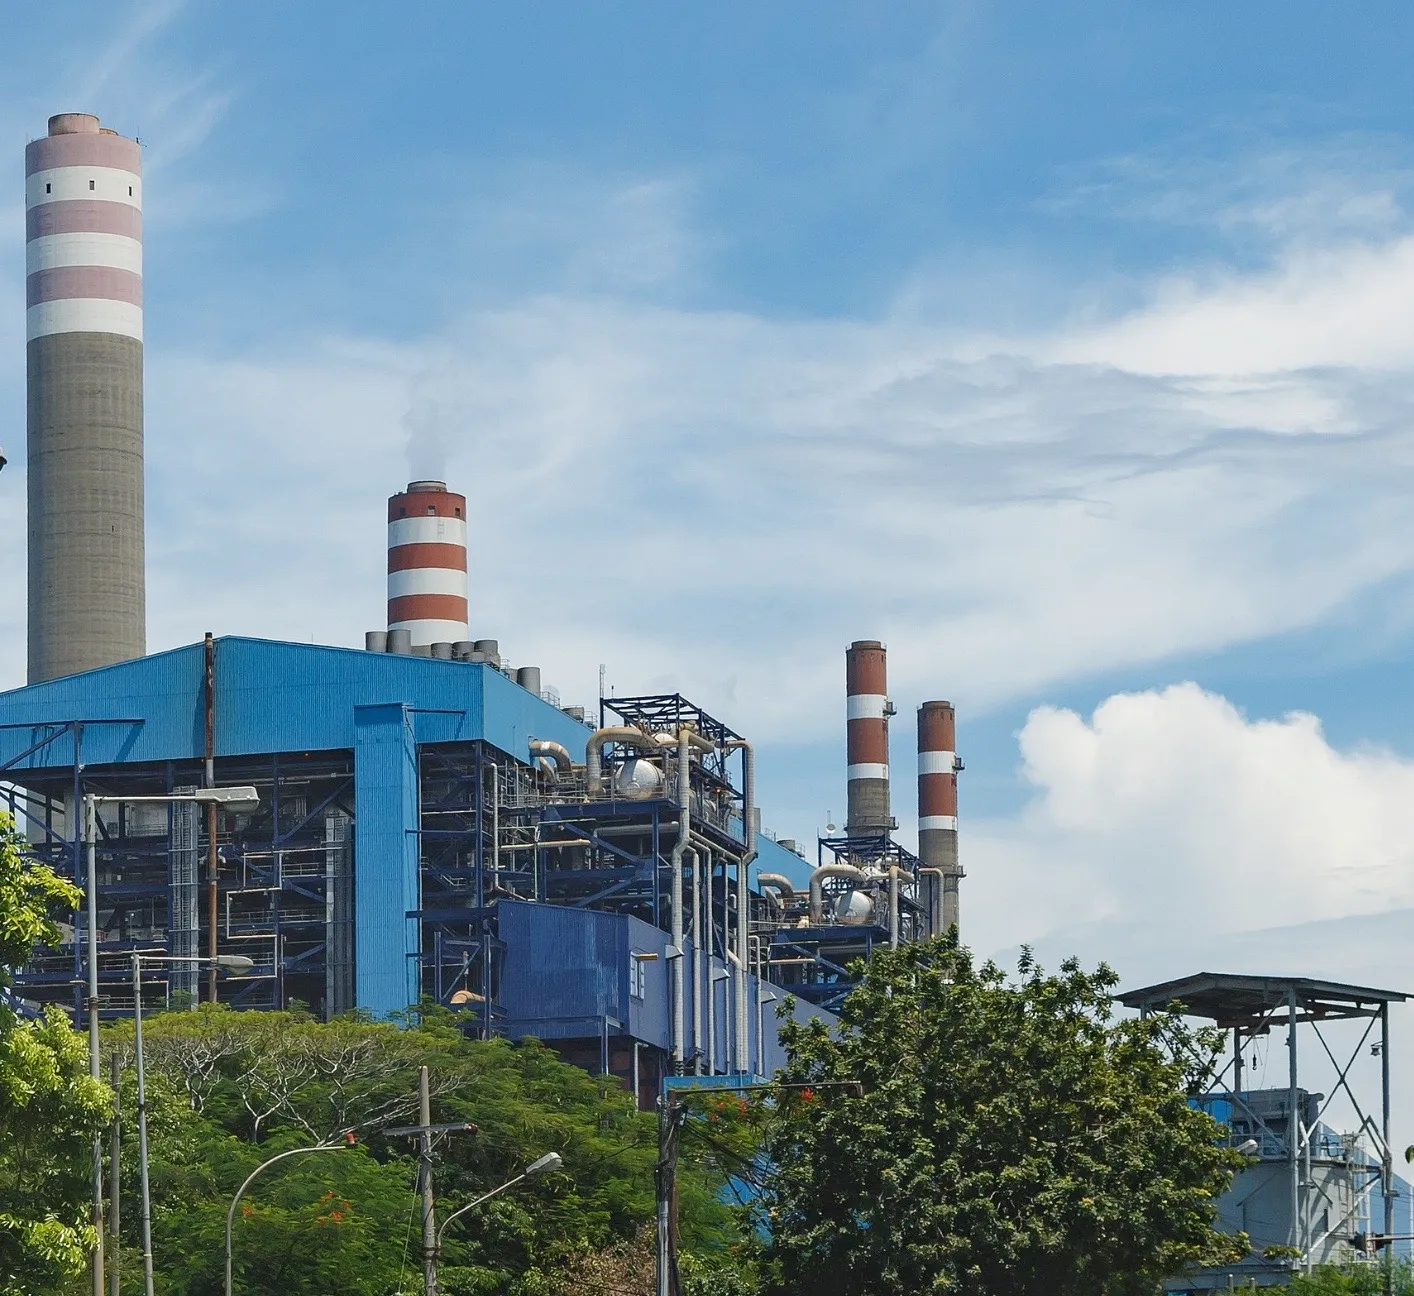 The Paiton Power Station is a 4,700-megawatt coal-fired power plant in East Java, Indonesia. It is the 10th largest coal-fired power plant in the world.